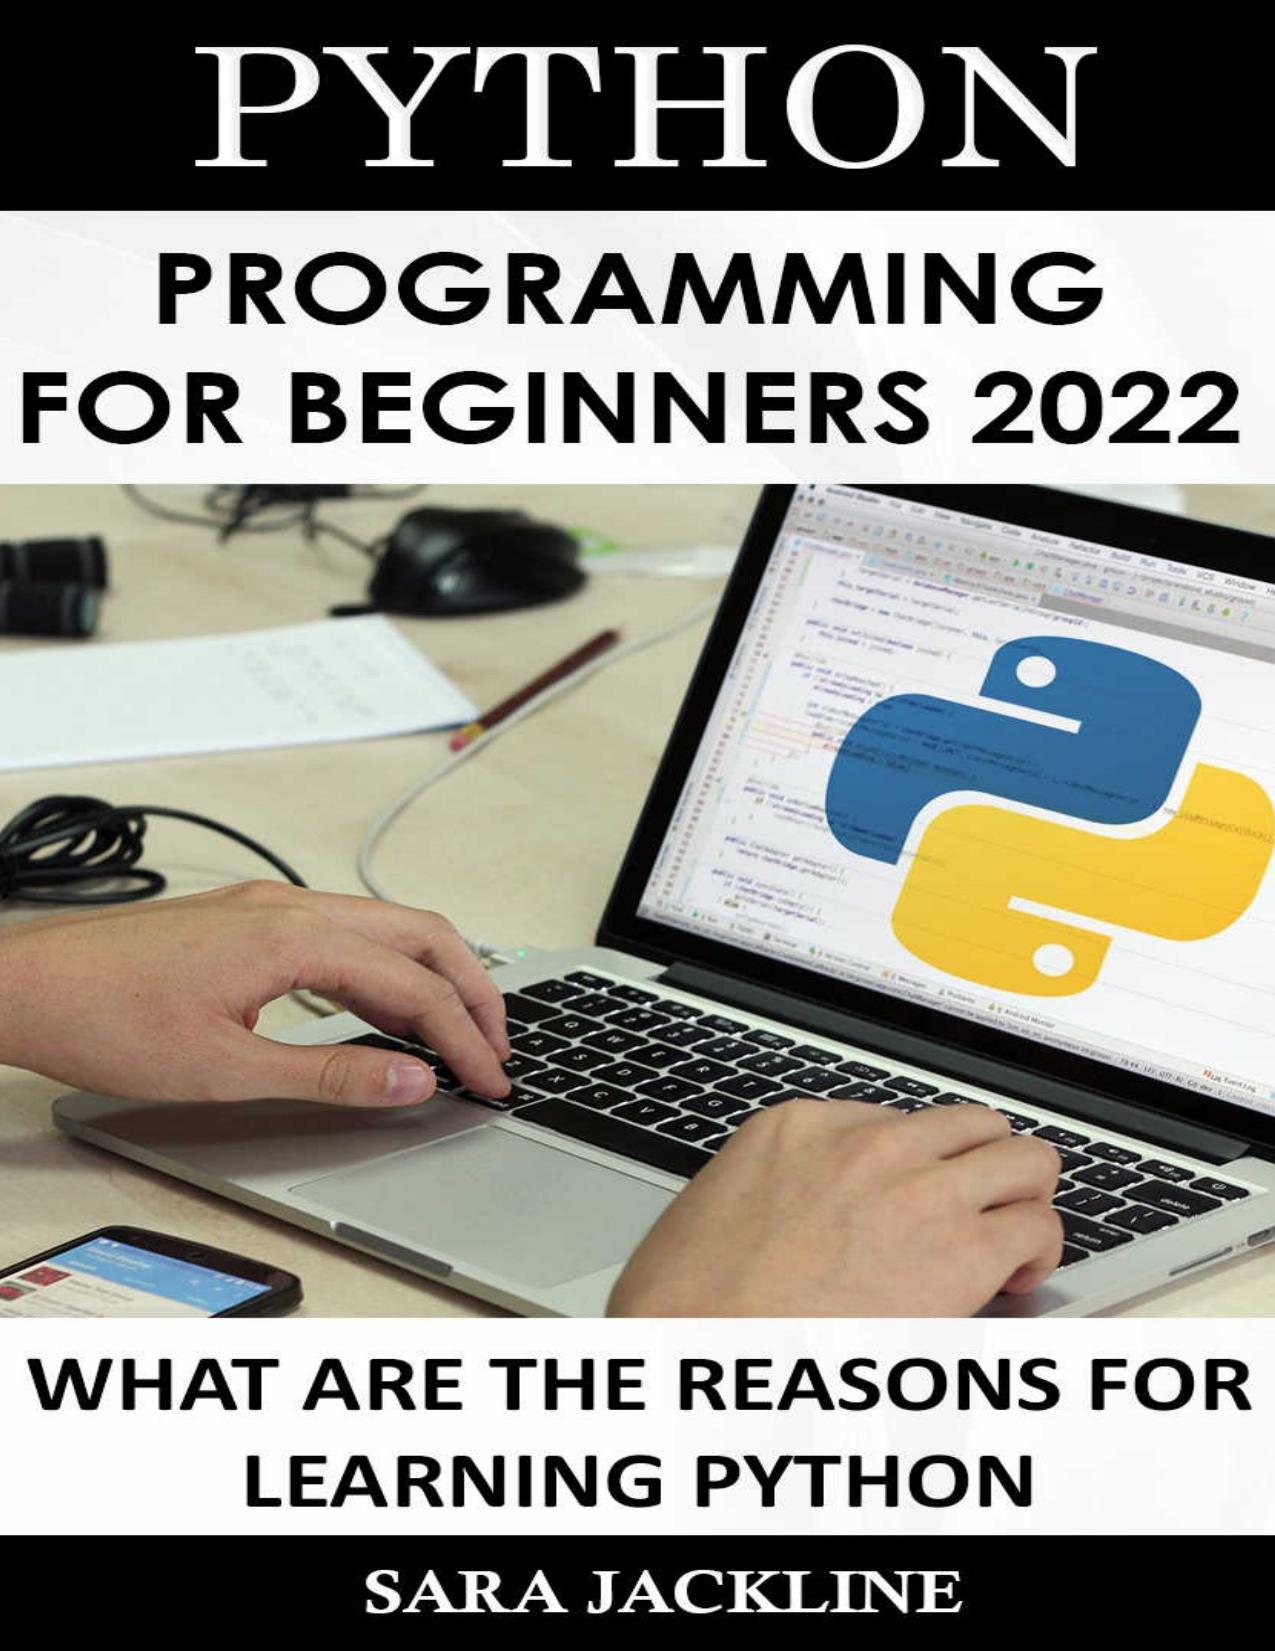 Python Programming For Beginners 2022: What Are The Reasons For Learning Python